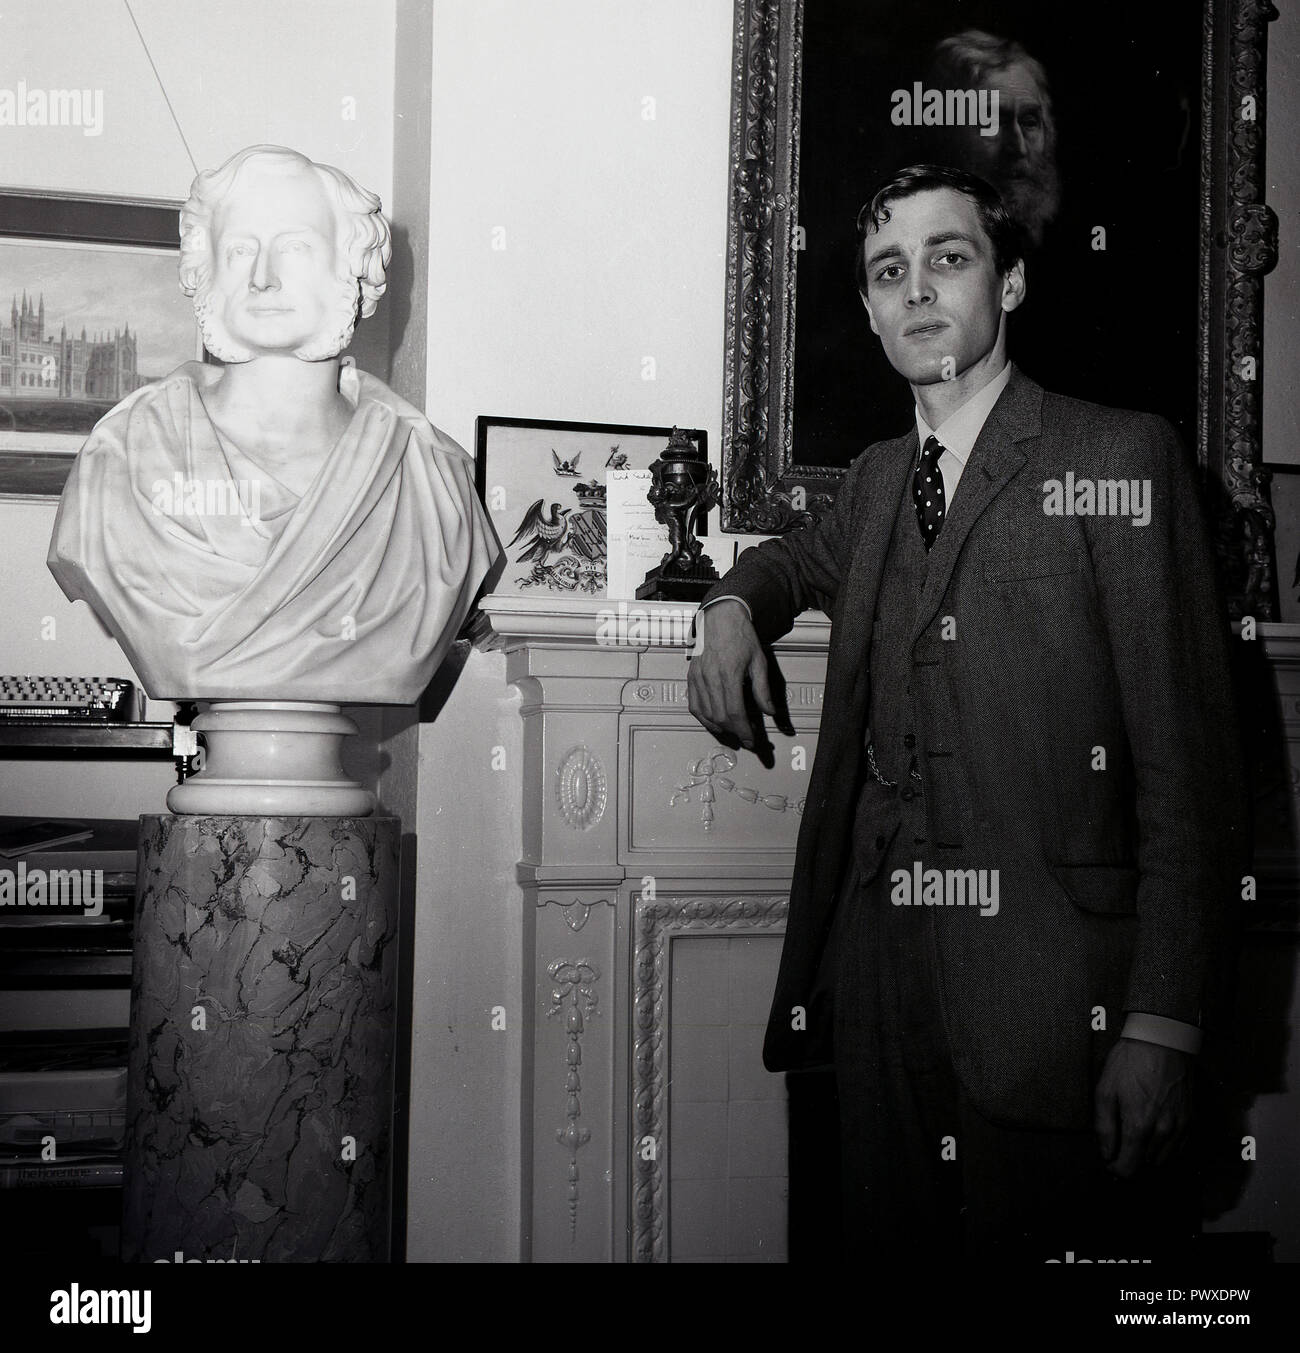 1960s, the 7th Baron Sudeley, Merlin Hanbury-Tracy standing by a bust of one of his forefather's, the likeness of which is apparent. An hereditary peer, Hanbury-Tracy went to Eton and Worcester College, Oxford and was an active member of the House of Lords until the act of 1999 which dramaticaly reduced there the number of hereditary peers. His home, Toddington Manor, a gothic manor house was architecturally the forerunner for the Houses of Parliament. Stock Photo